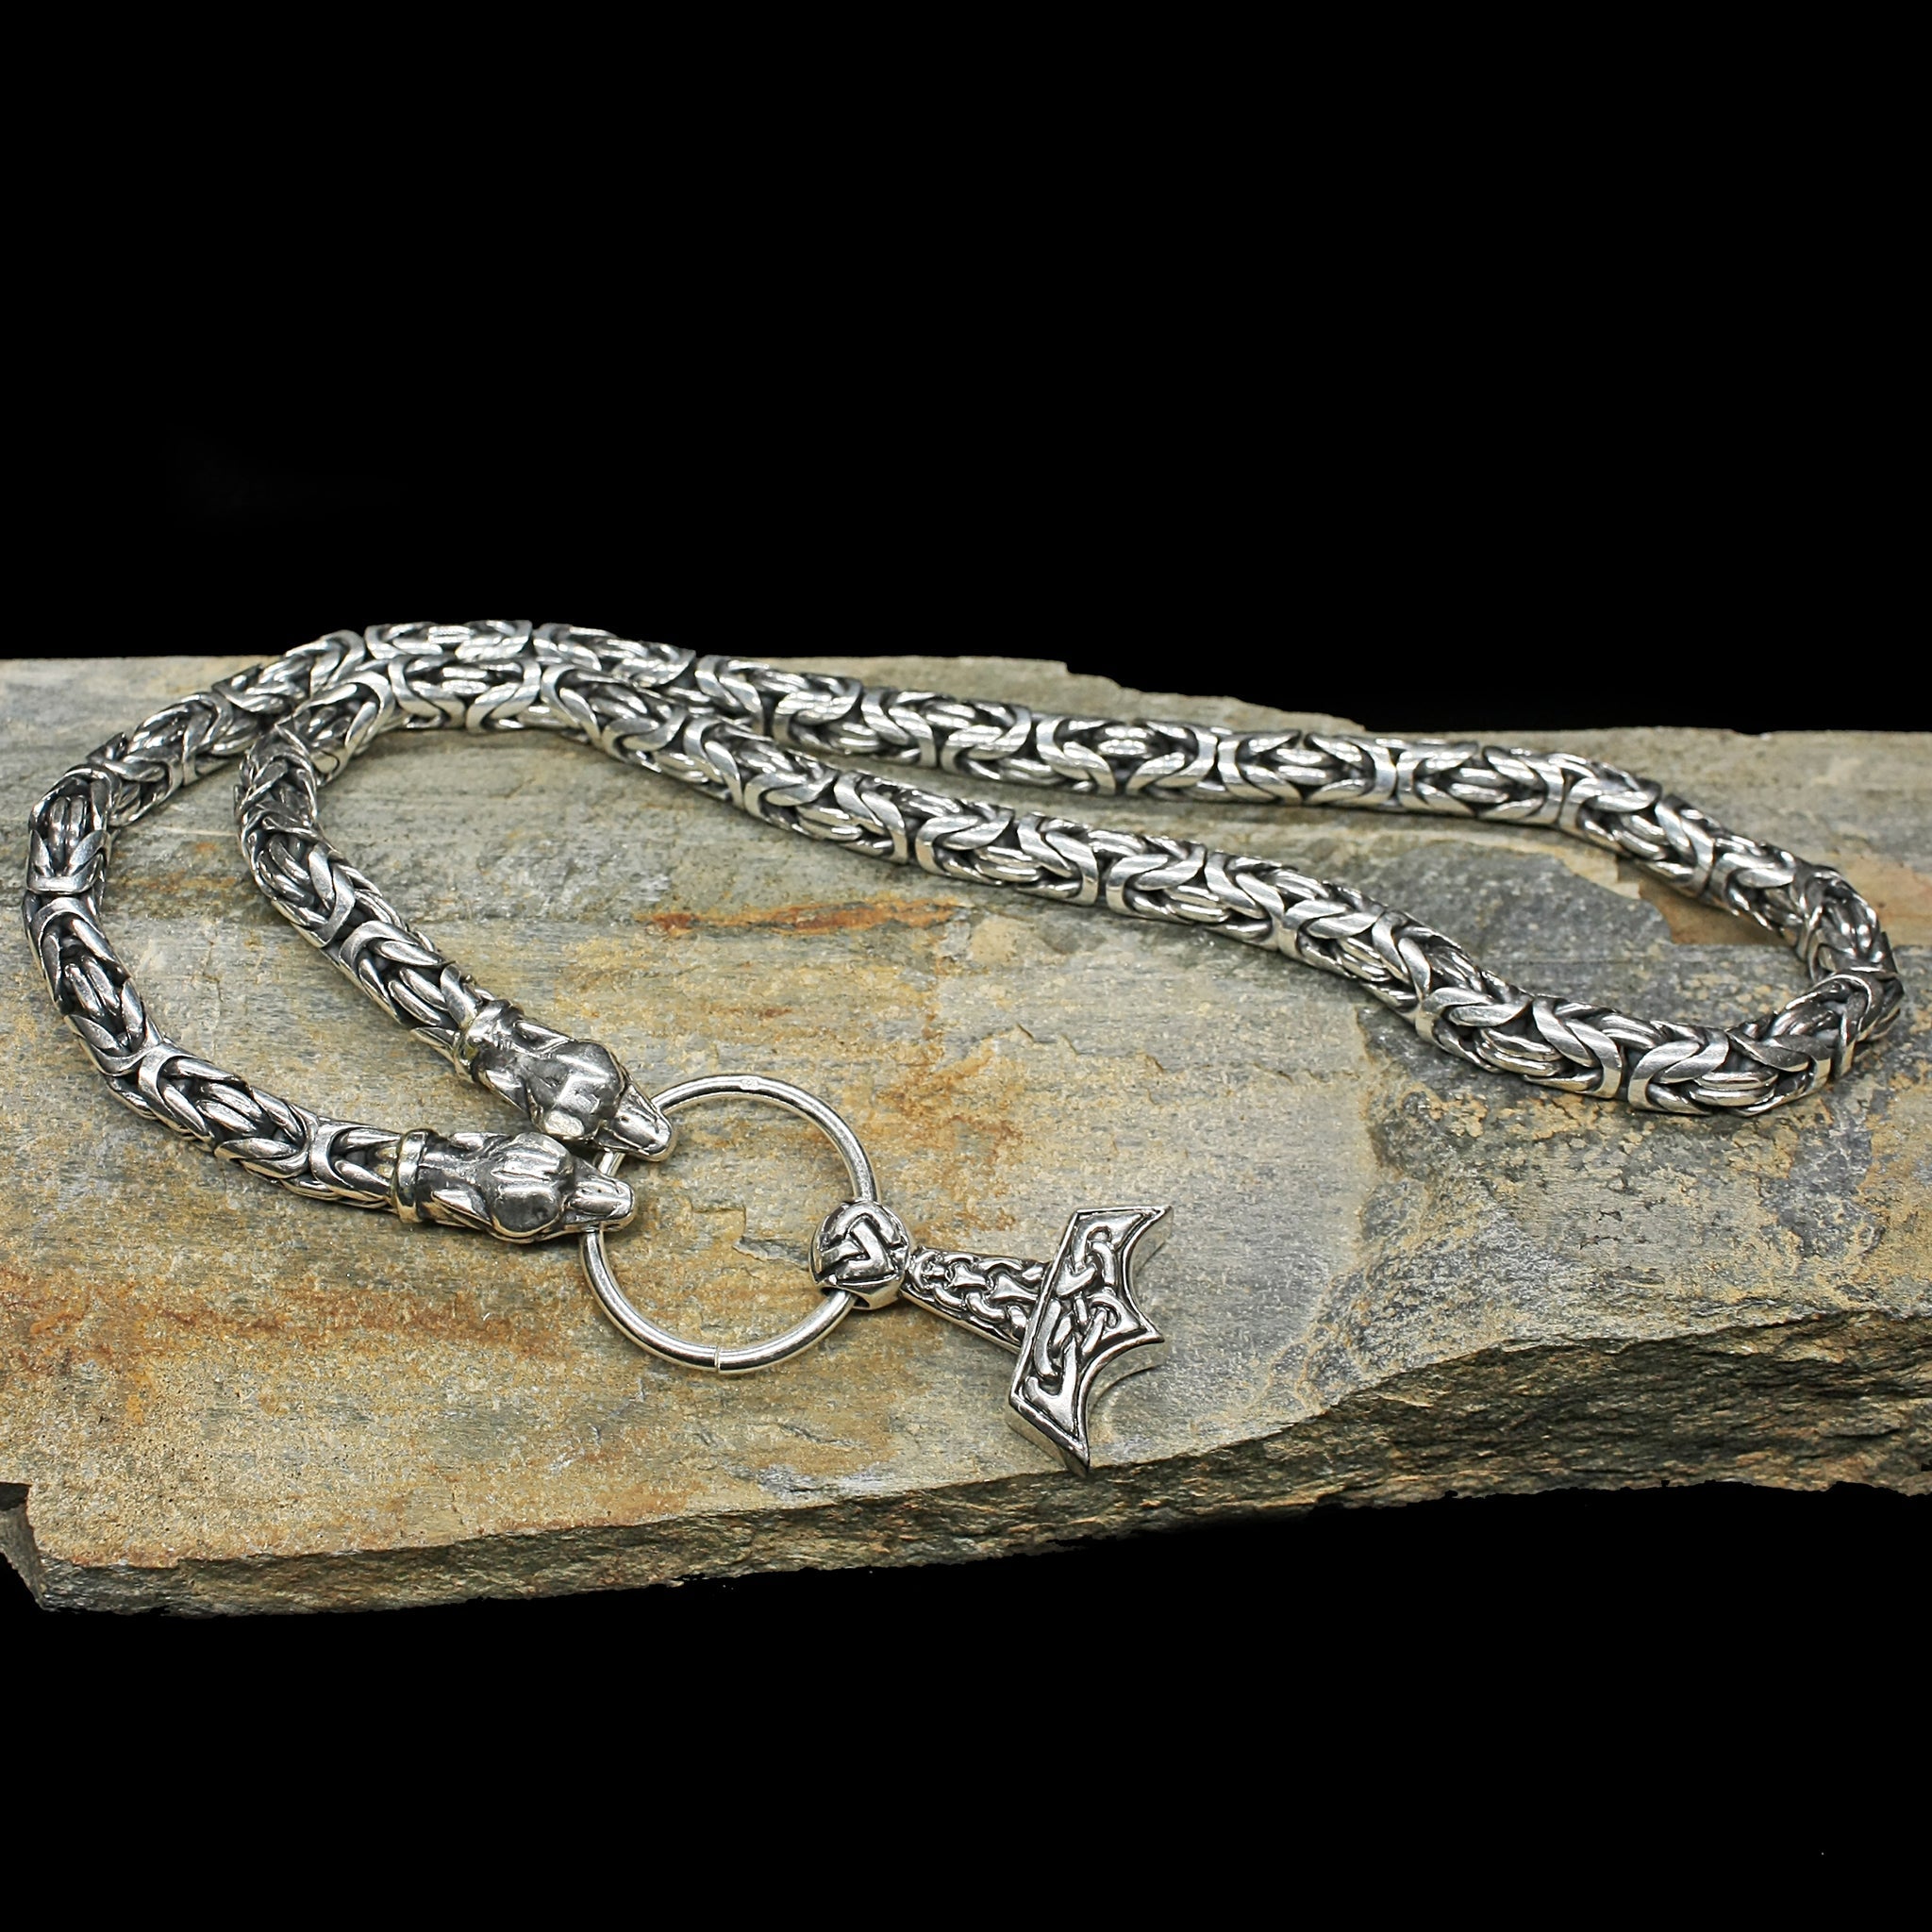 8mm Thick Silver King Chain Thors Hammer Necklace - Ferocious Wolf Heads - Split Ring - Knotwork Thors Hammer